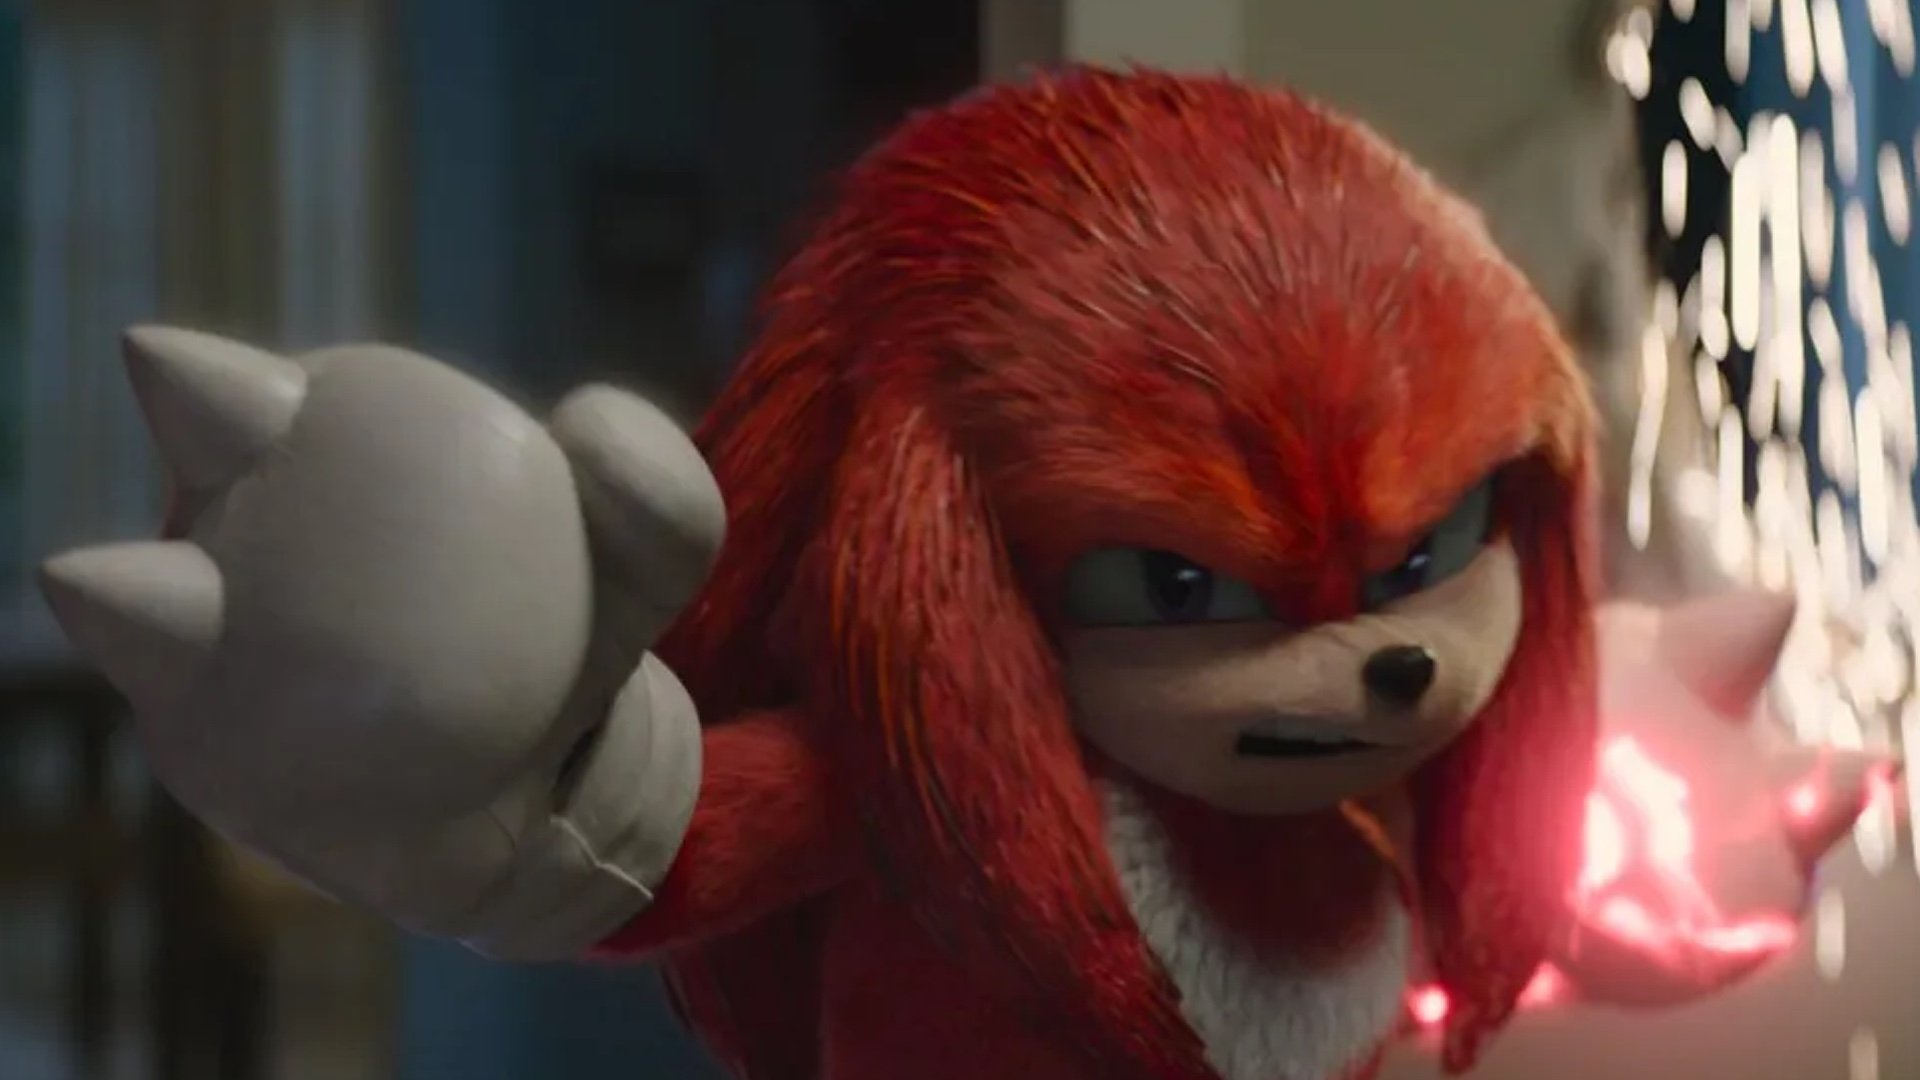 Will we get some Sonic movie 3 & Knuckles stuff by the end of this